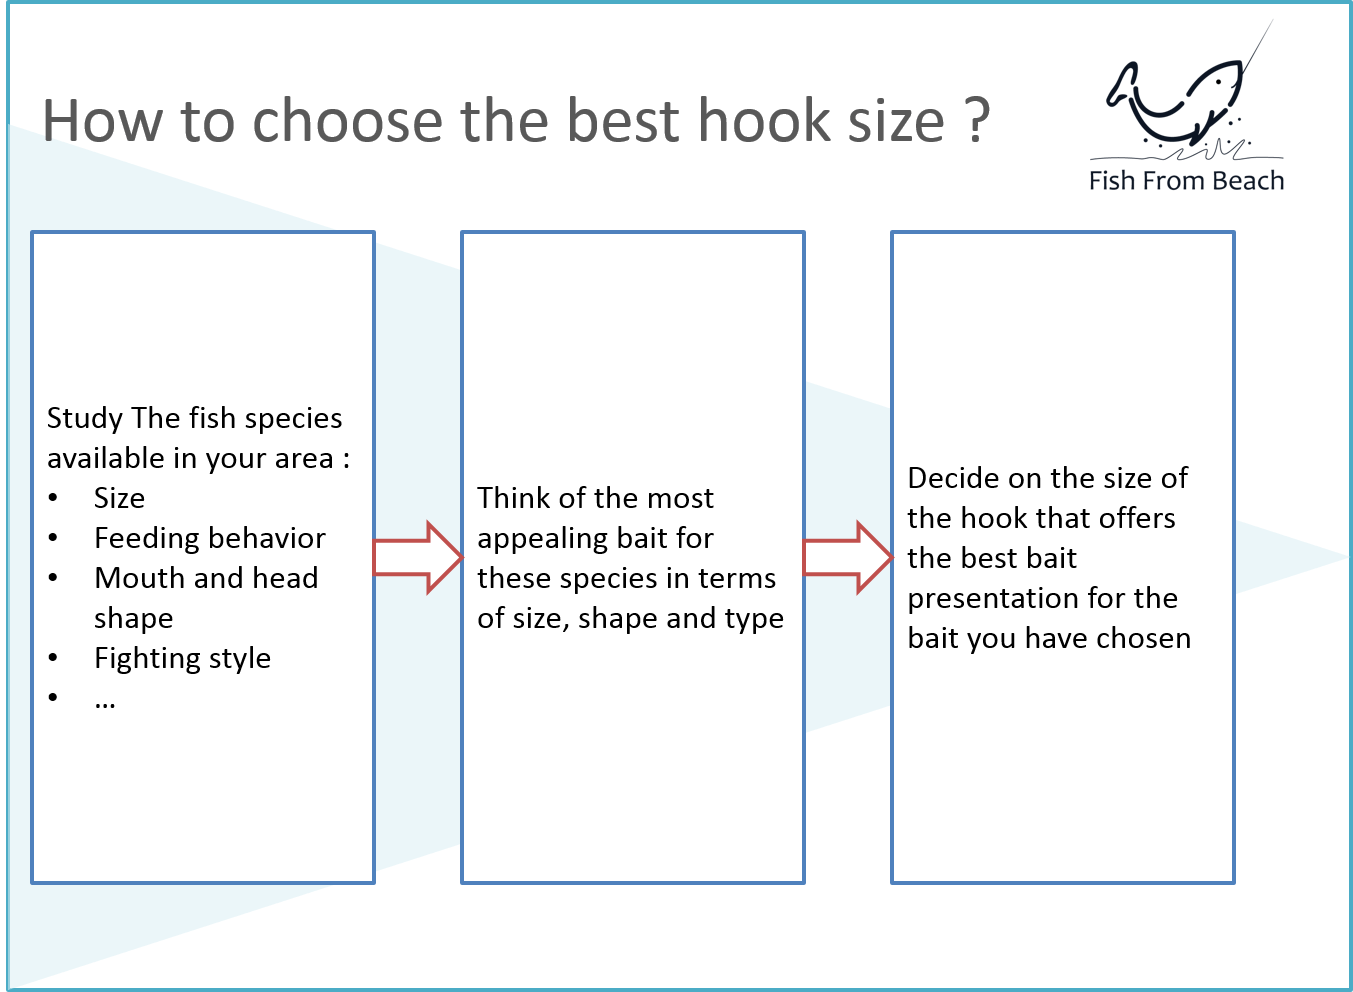 How to decide the hook size ?